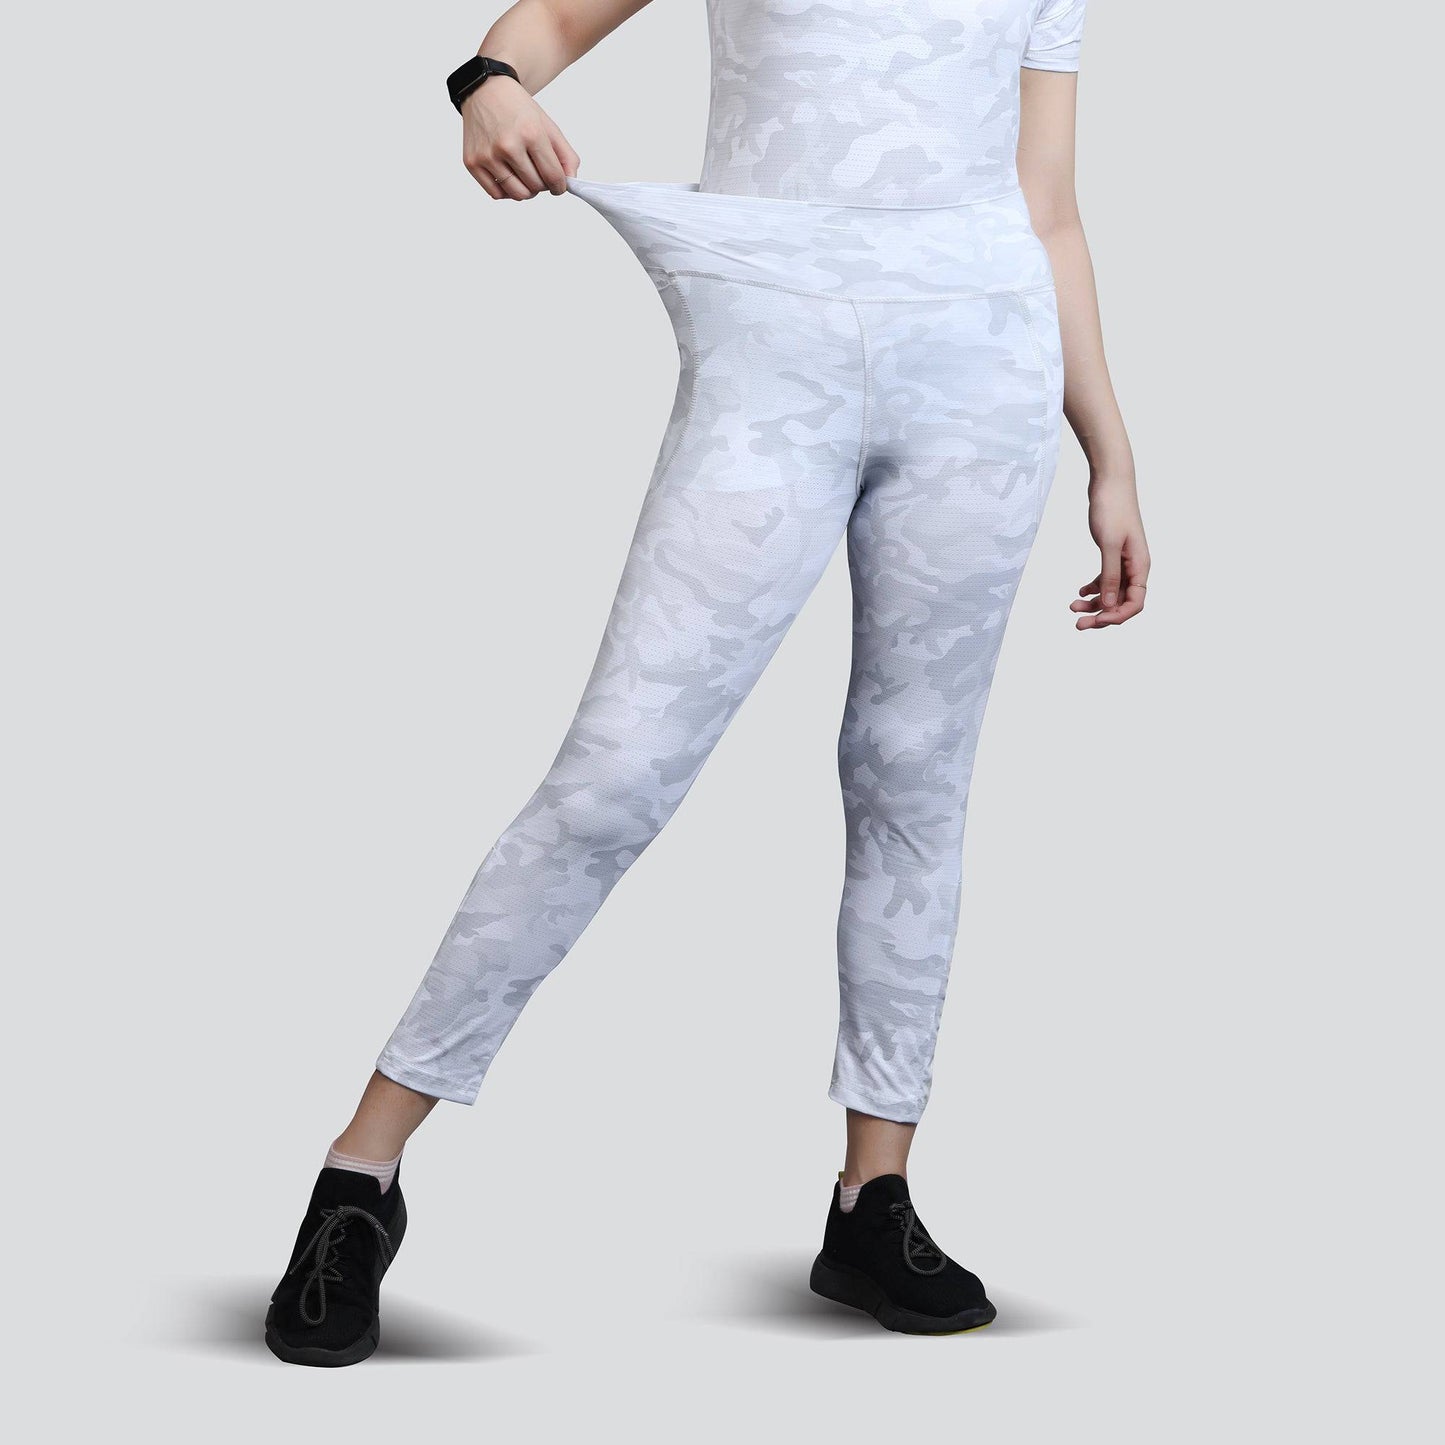 Women's Camo Workout High-Waisted Stretchable Leggings - White - Valetica Sports